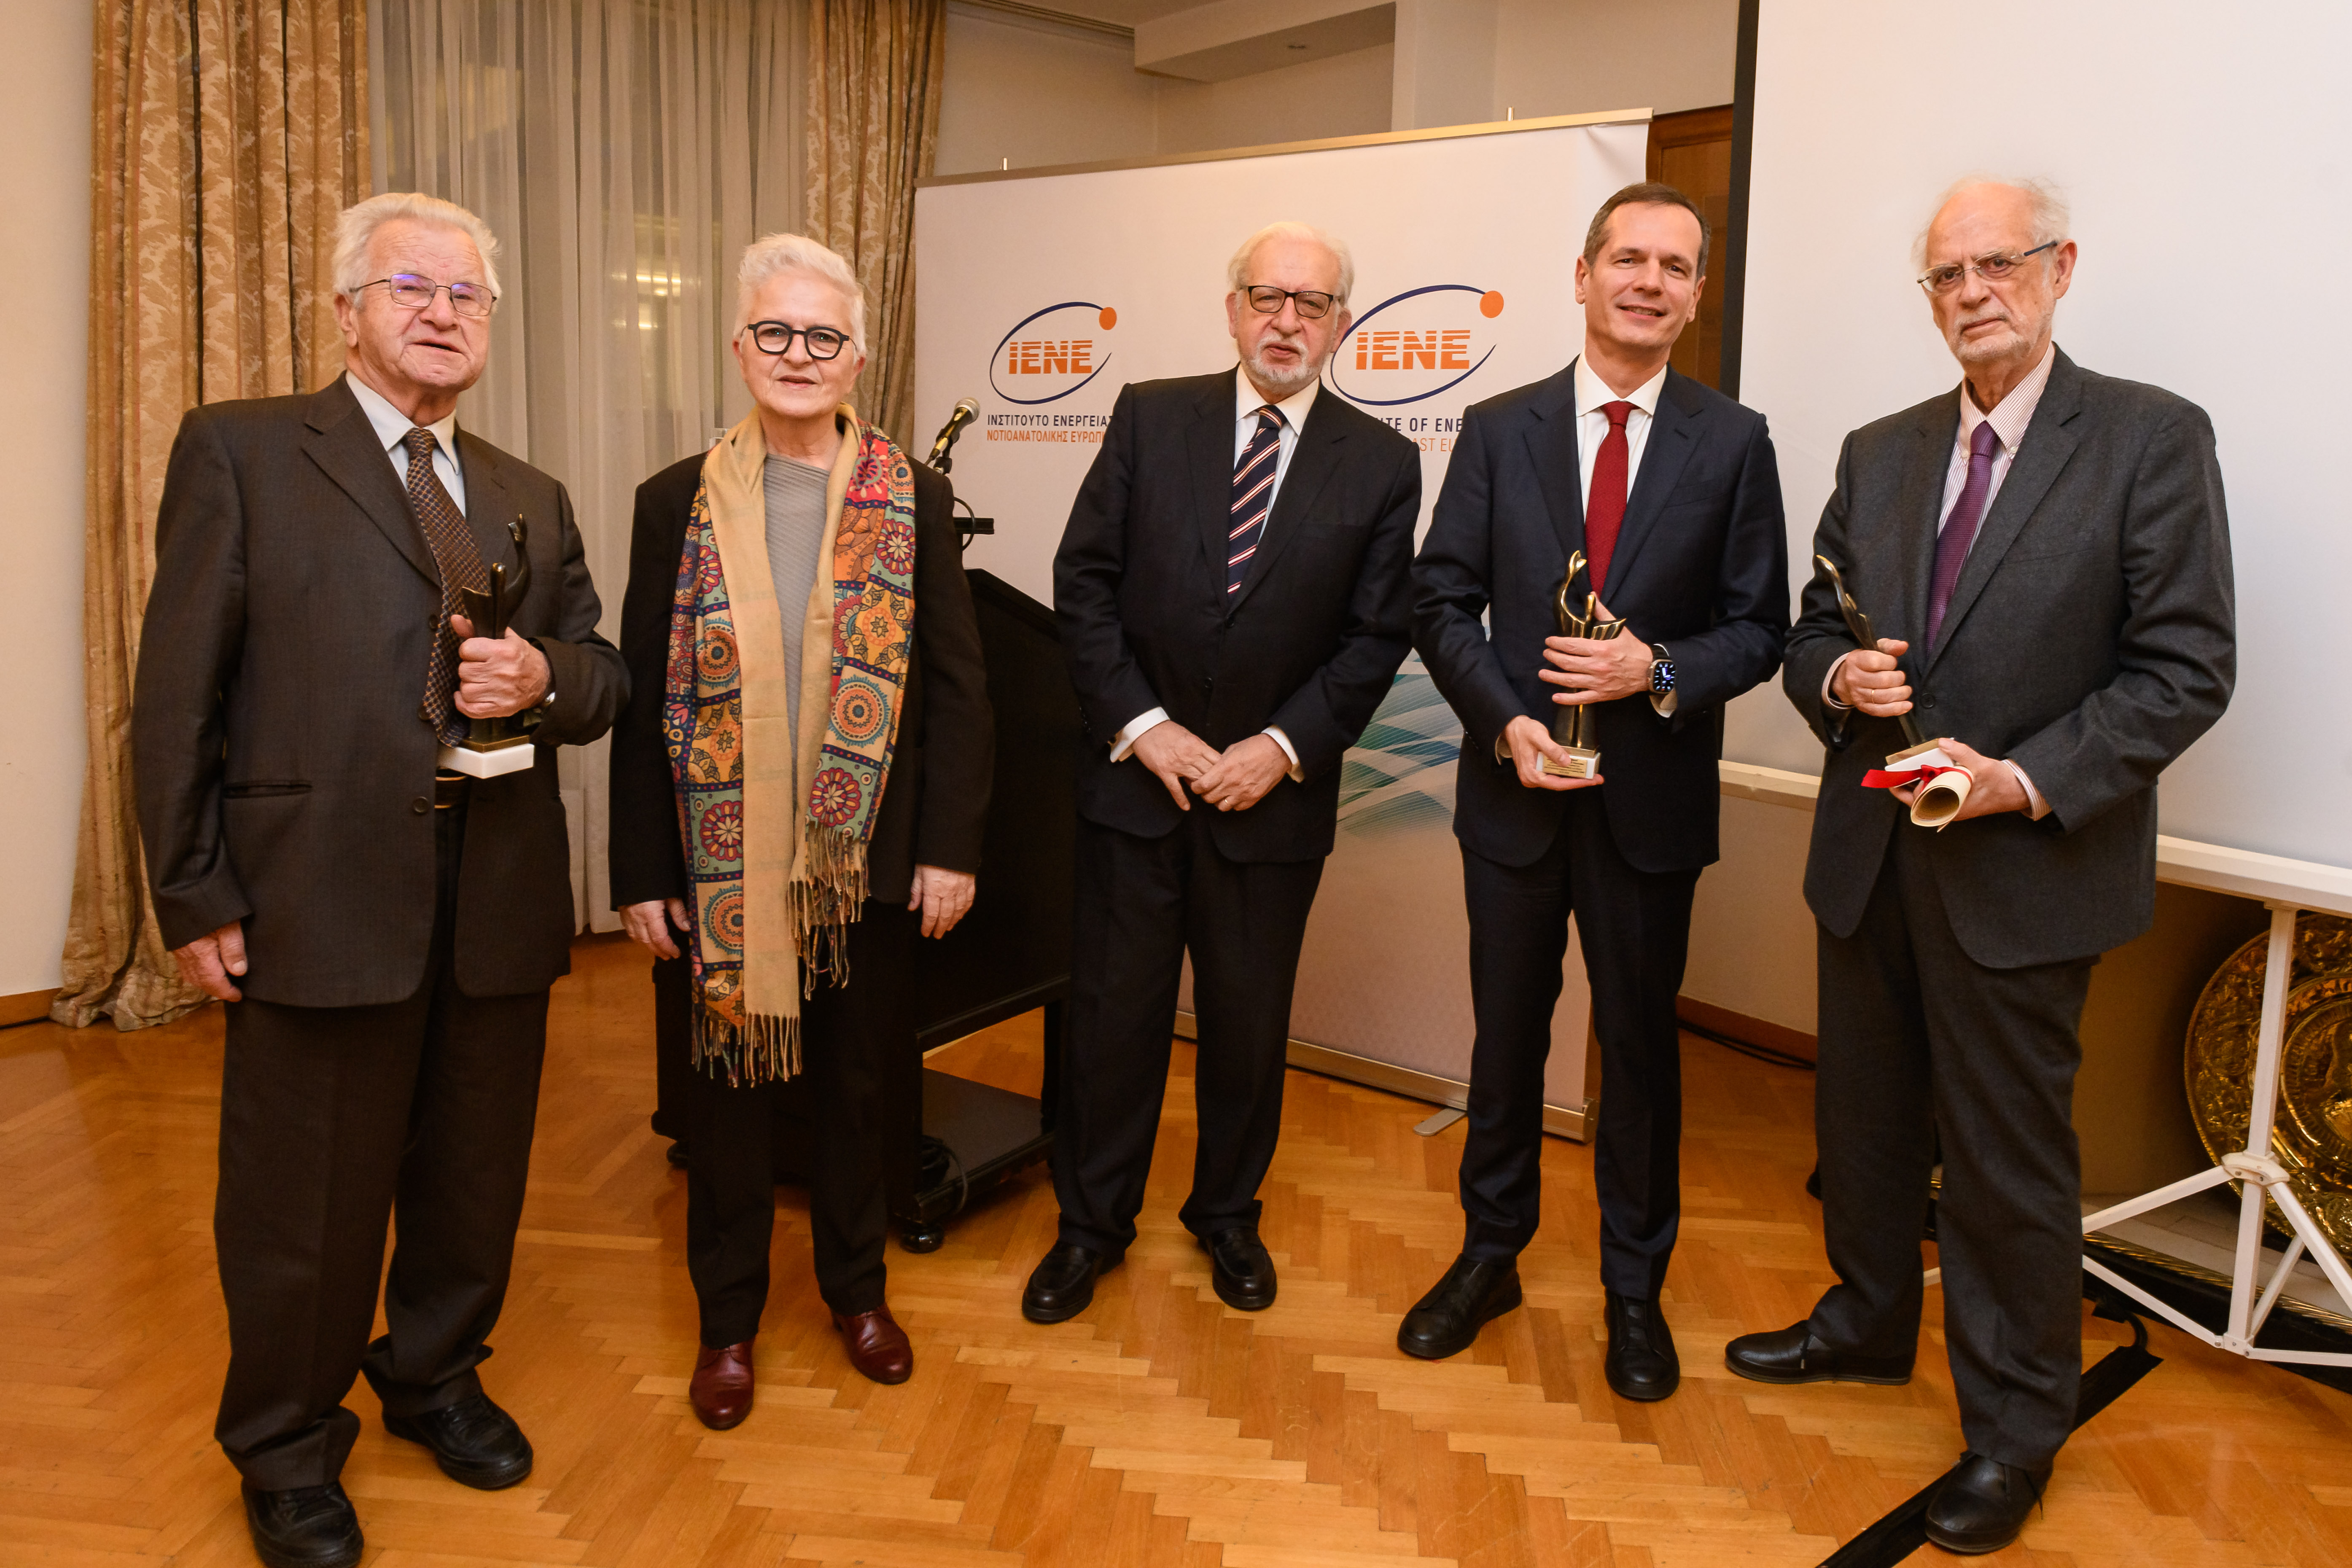 "PROMETHEUS 2024" Awards: IENE Honored Four Personalities from Greece’s Energy Sector